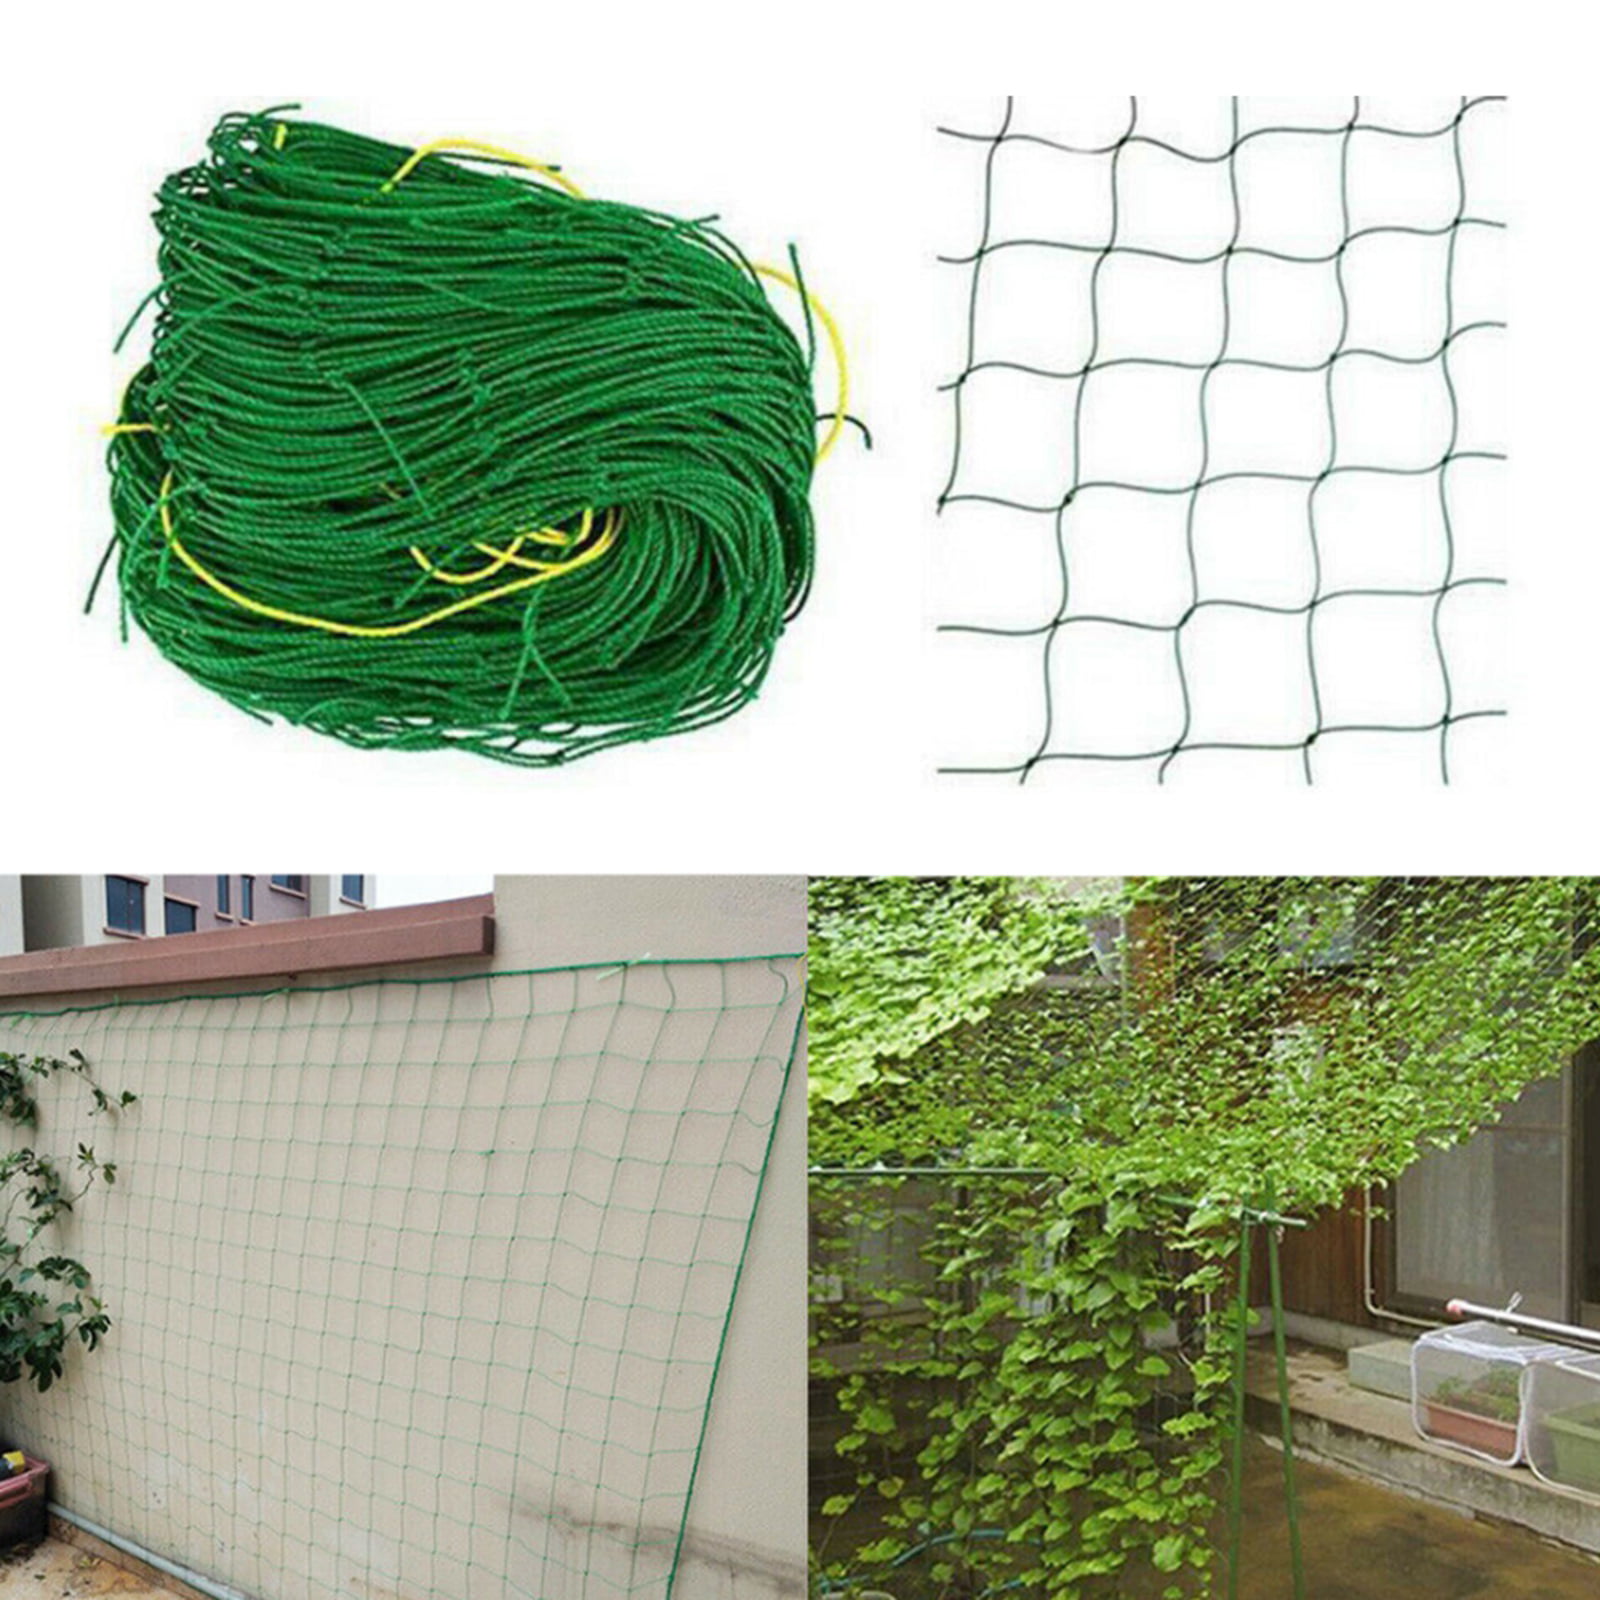 DIY Home Gardening Climbing Net Vegetables Climbing Plant Outdoor Rope Plant HOT 